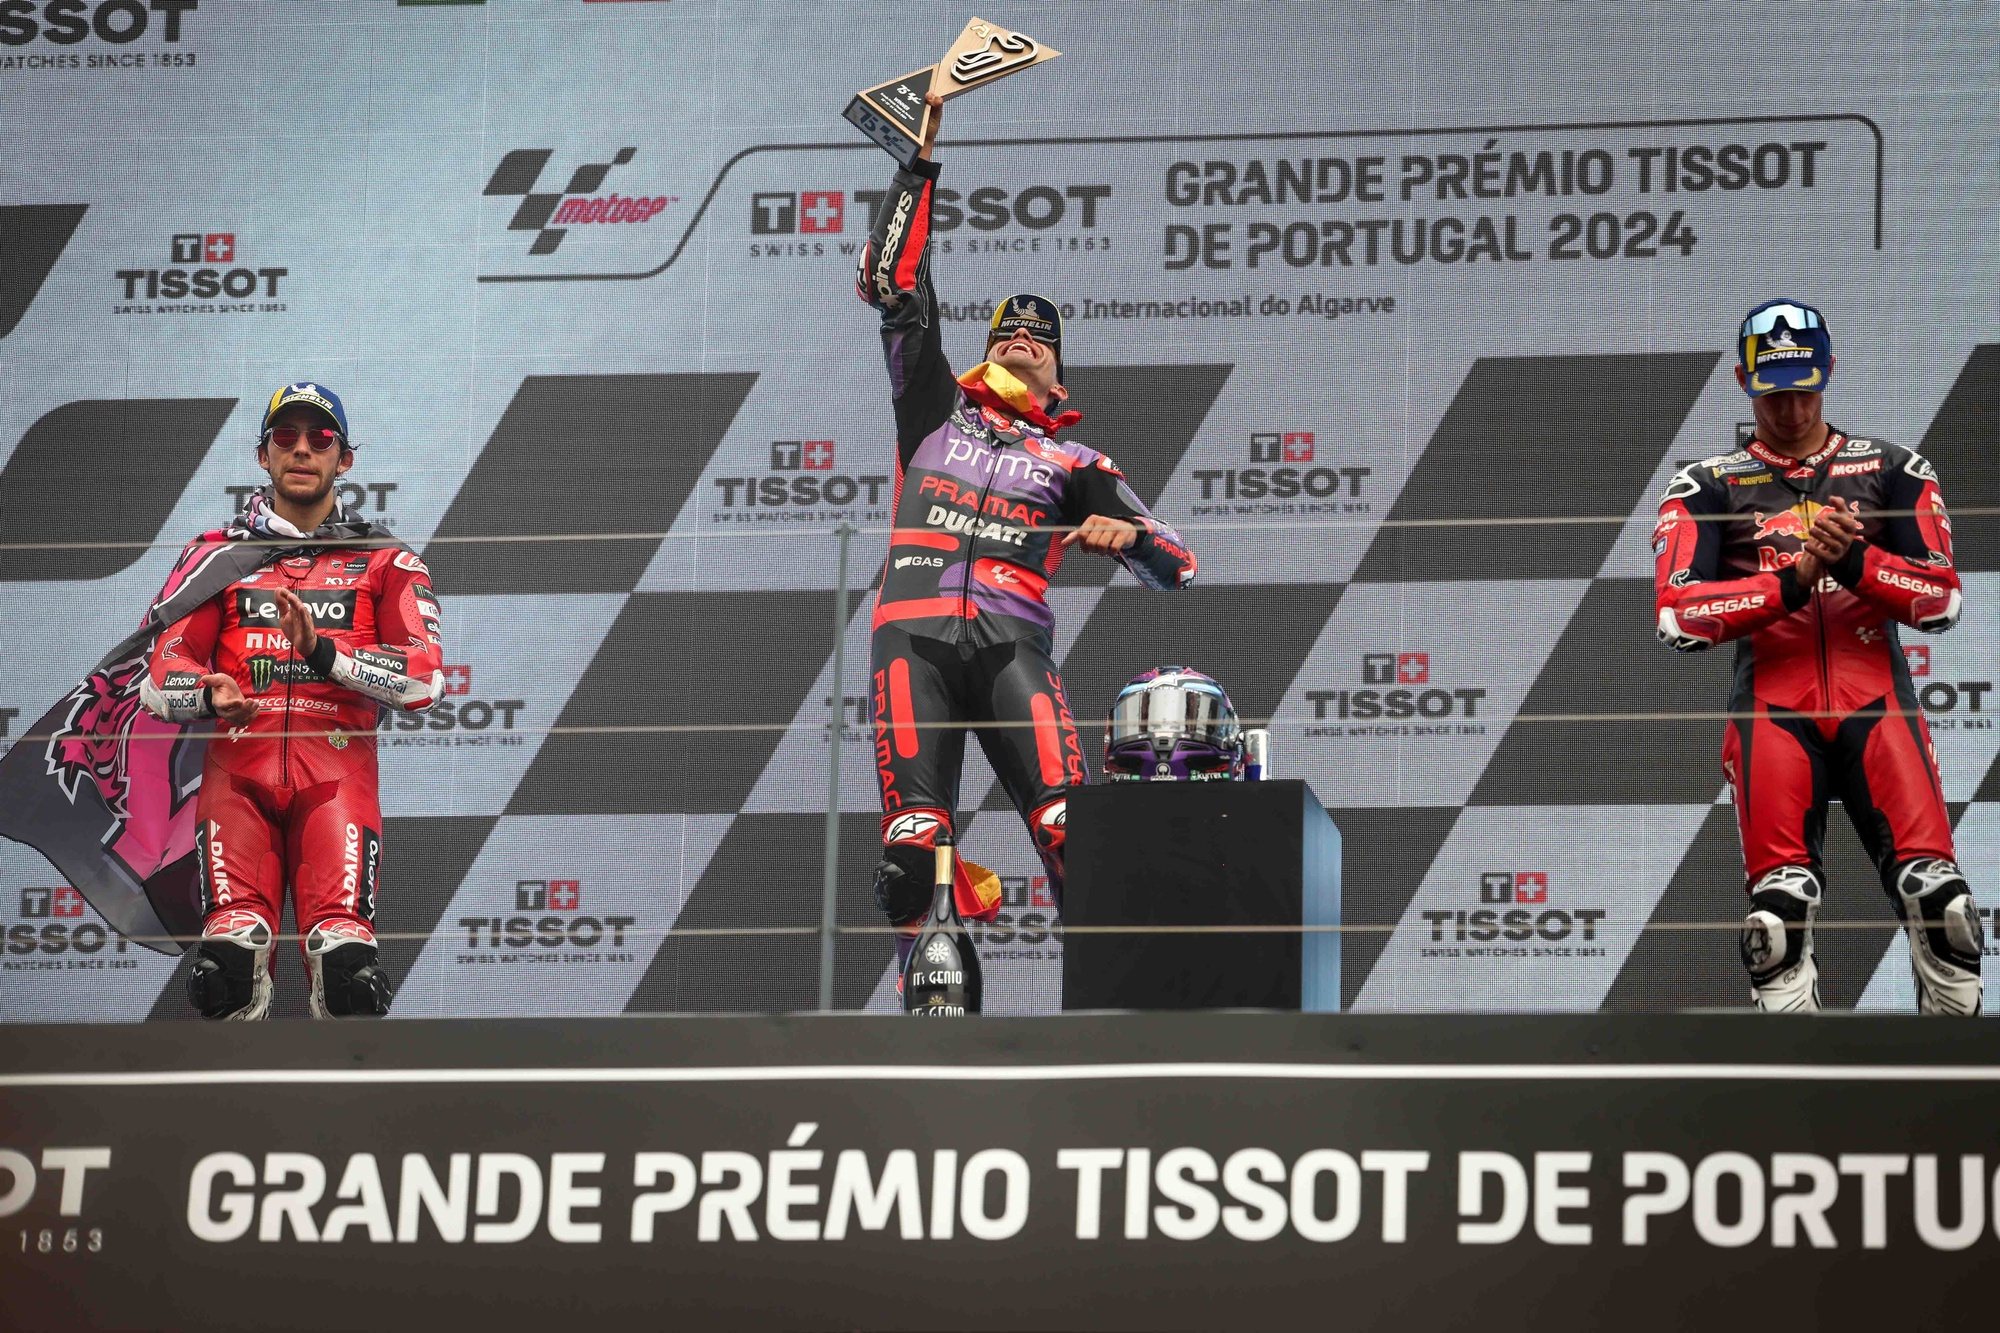 epa11241251 (L-R) Second placed Enea Bastianini of Italy and Ducati Lenovo Team, winner Jorge Martin of Spain and Prima Pramac Racing, and third placed Pedro Acosta of Spain and Red Bull GASGAS Tech3 celebrate on the podium after winning the MotoGP race of the Motorcycling Grand Prix of Portugal, in Portimao, Portugal, 24 March 2024.  EPA/JOSE SENA GOULAO